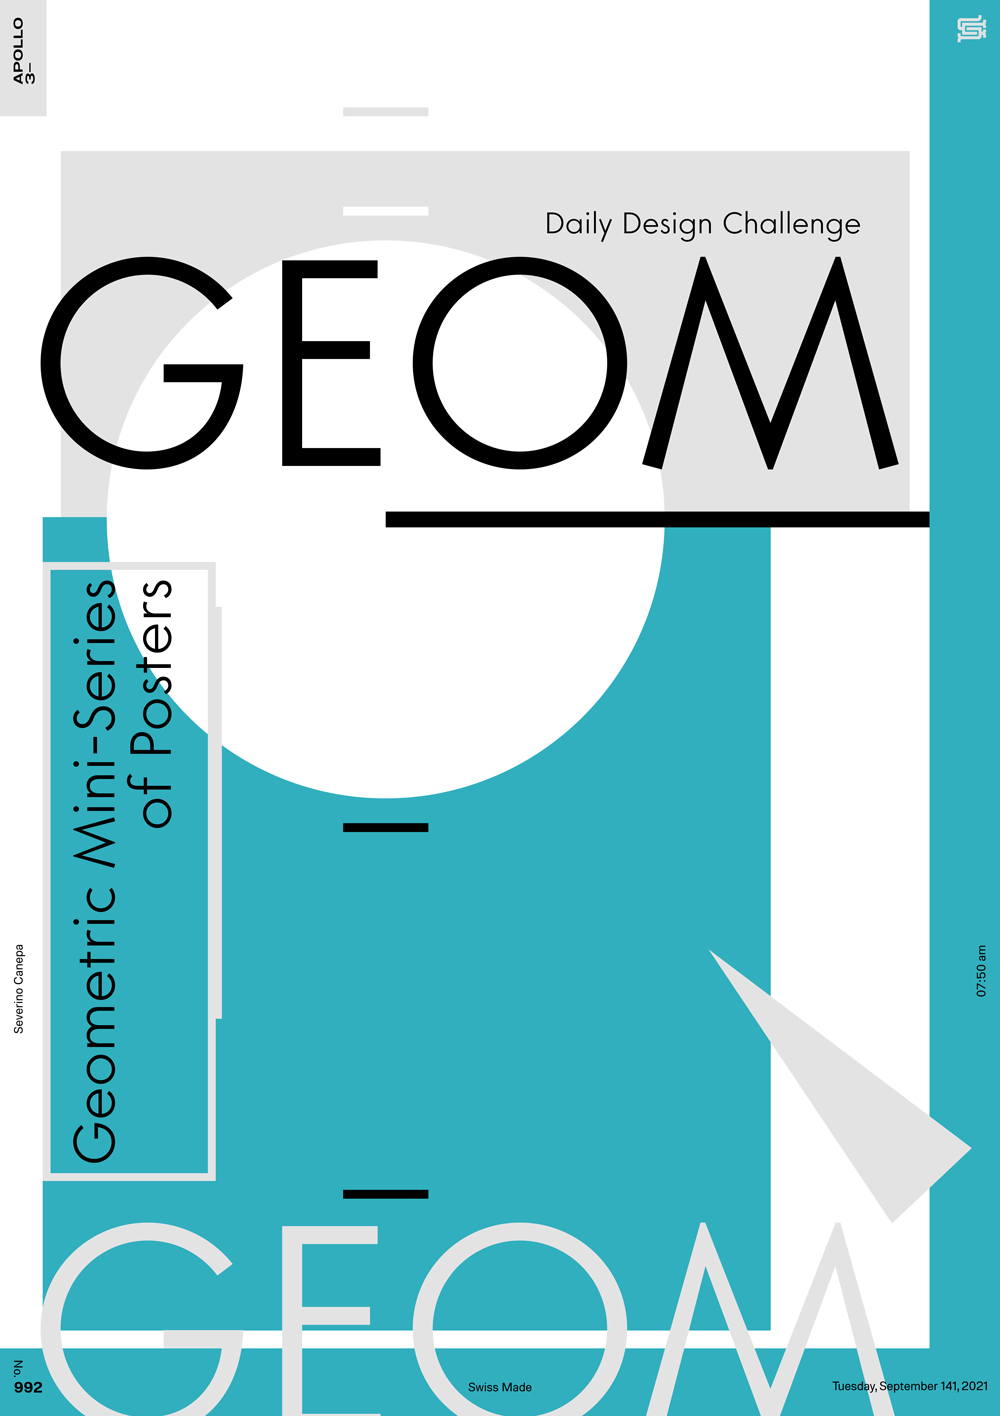 Geometric poster made with basic shapes and typography issued from the mini-series named Geom